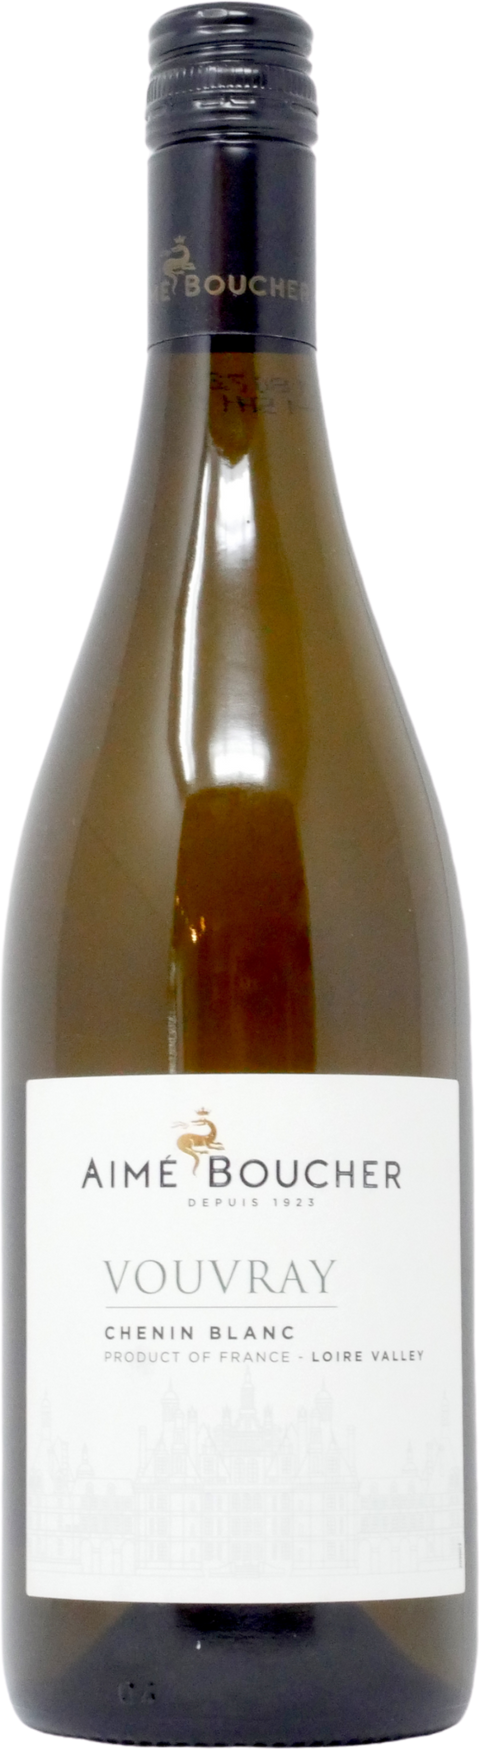 2017 Aime Boucher Vouvray